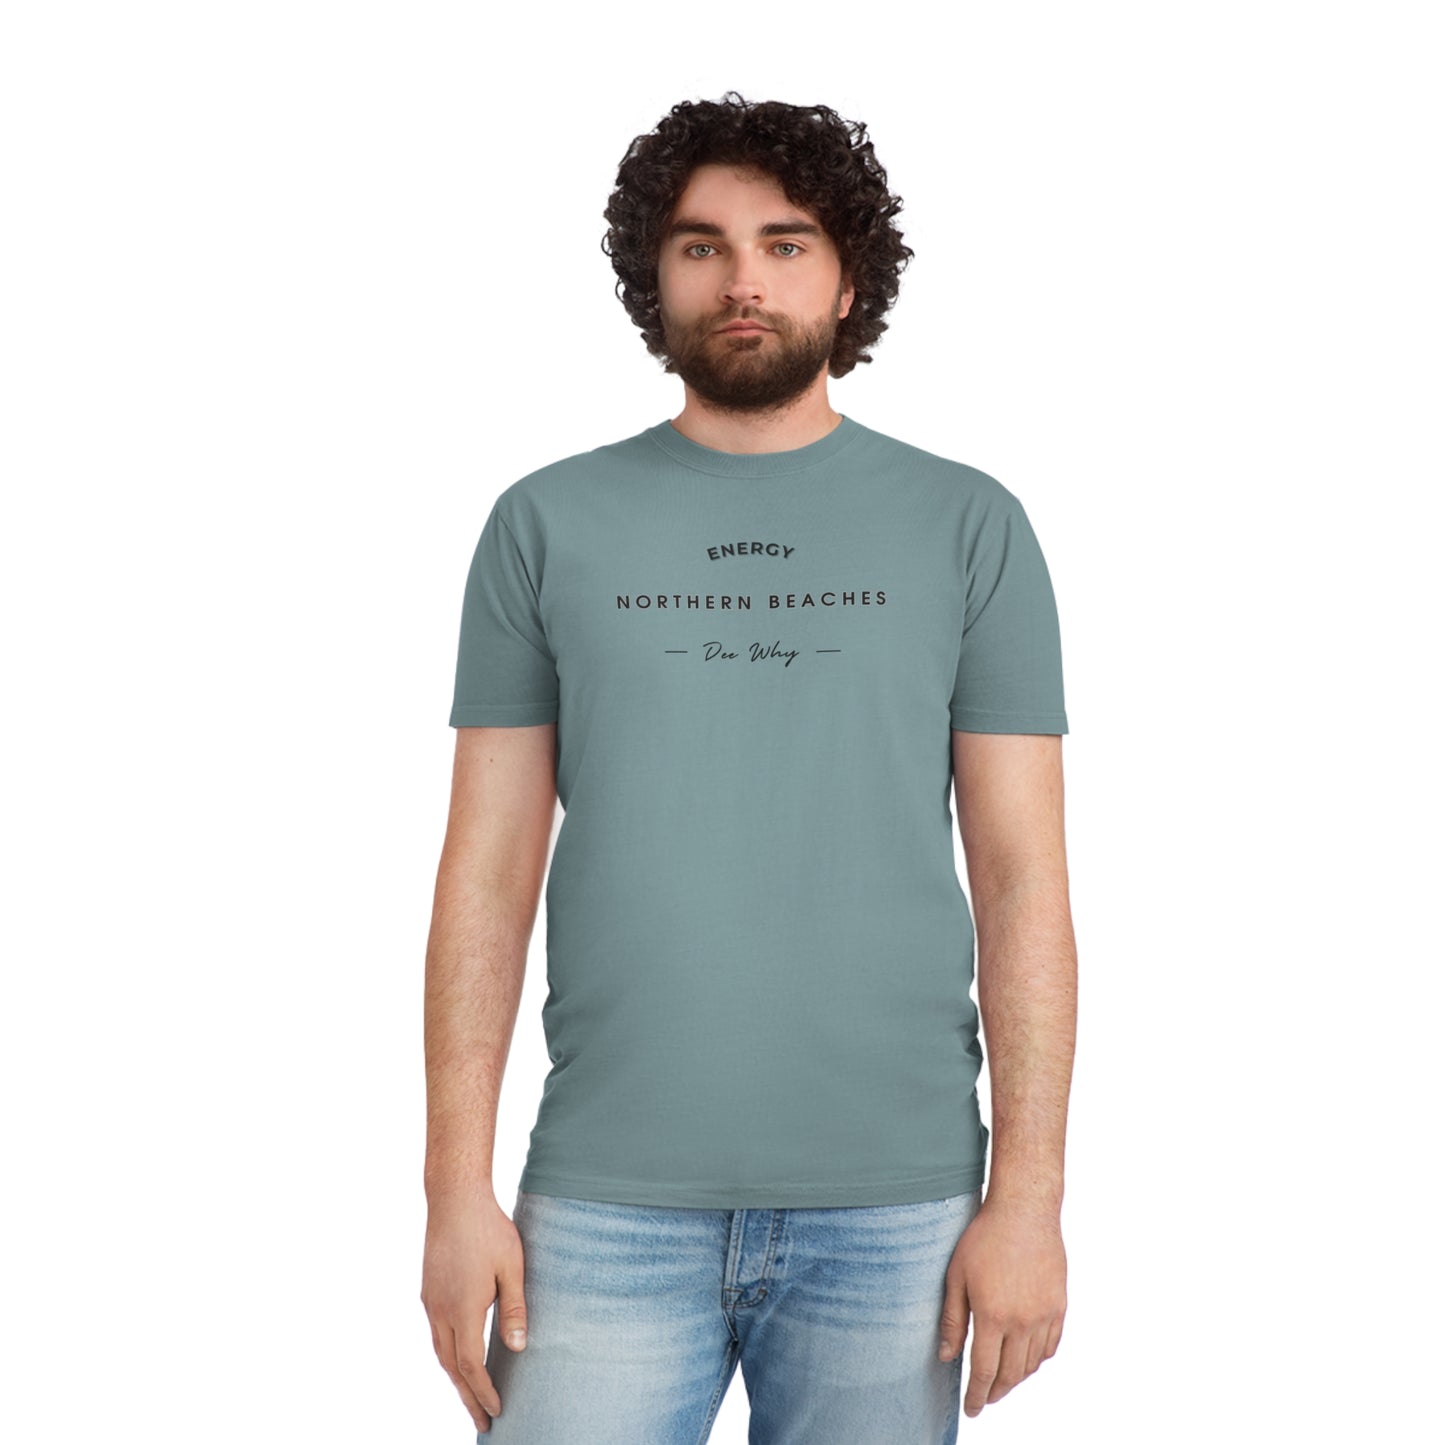 Northern Beaches Dee Why AS Colour 100% Cotton Unisex Faded Shirt